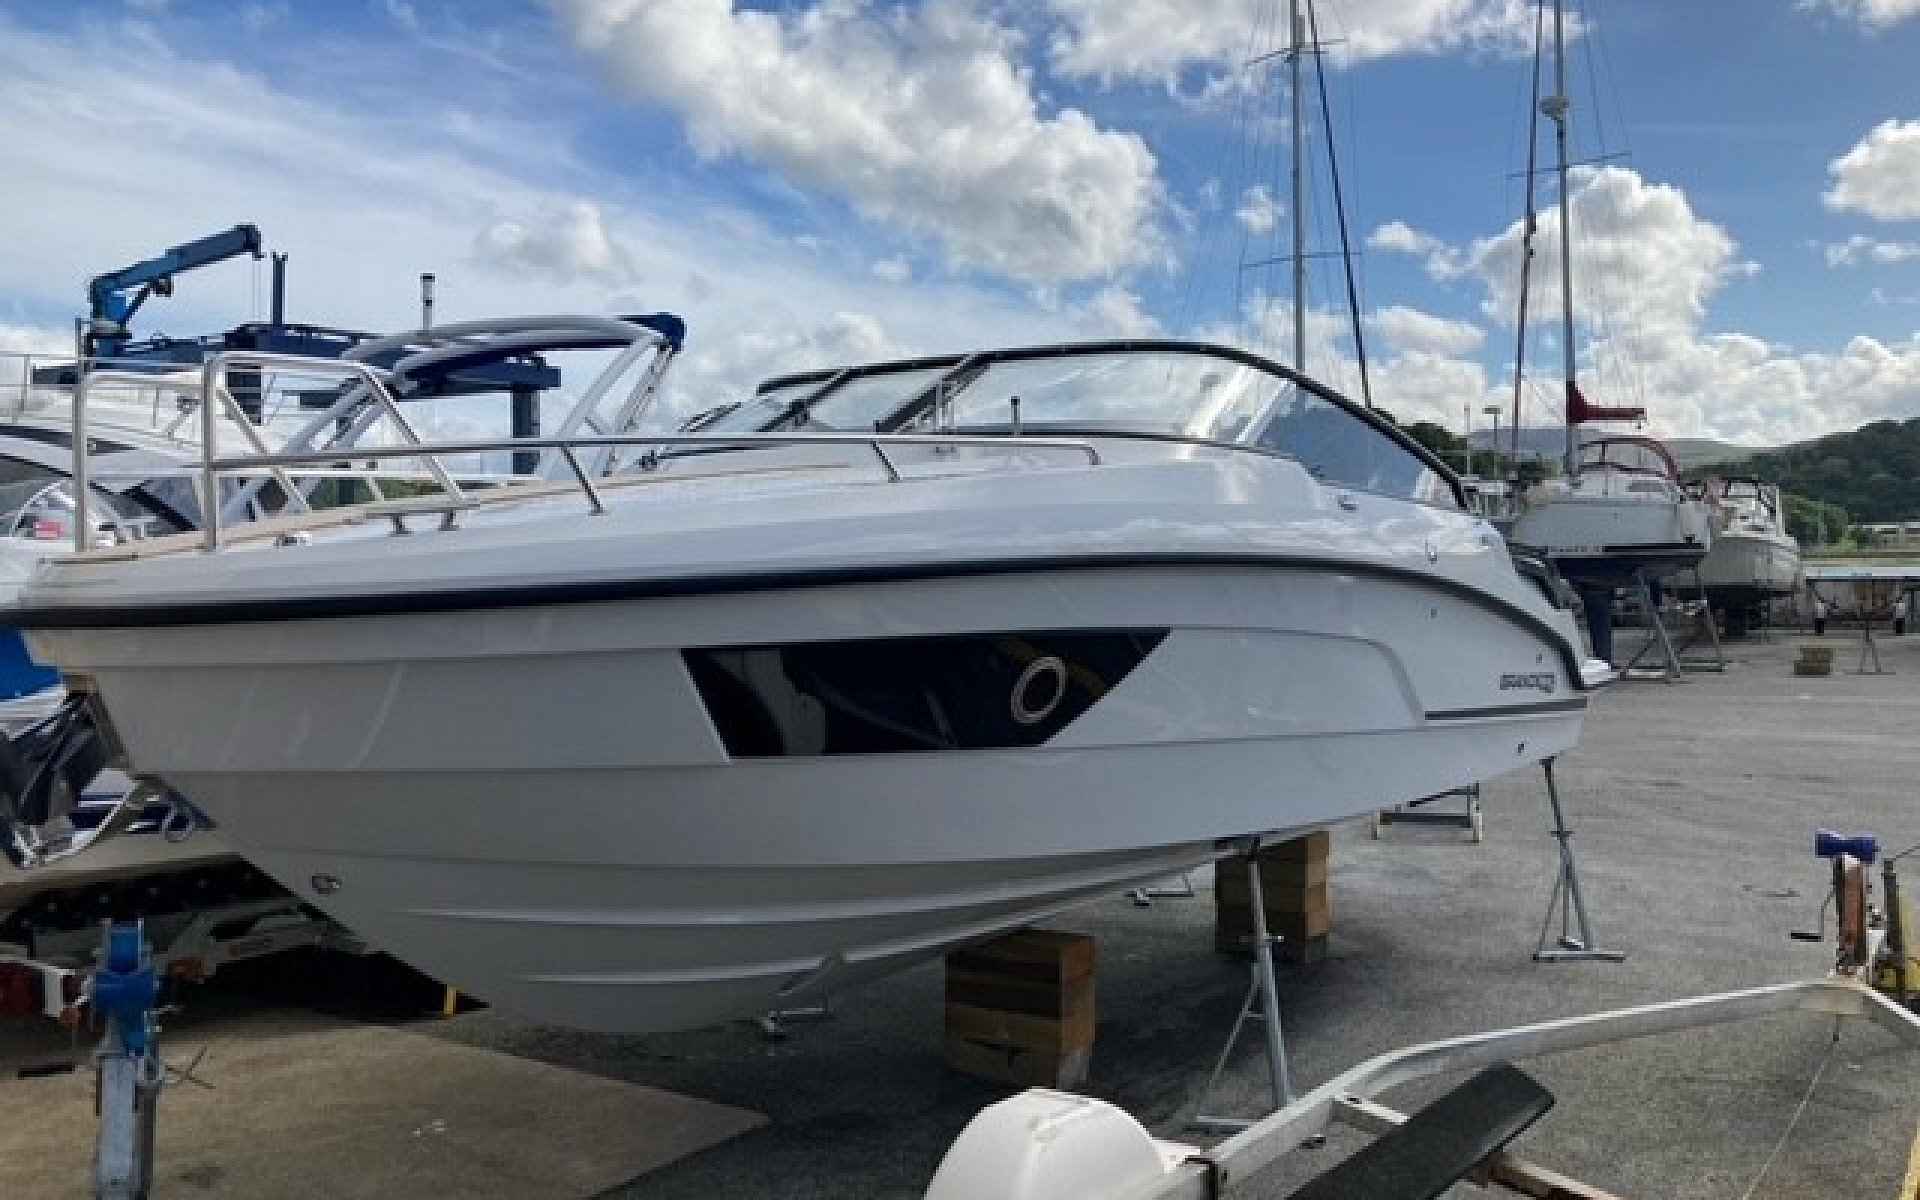 GRANDEZZA 25 S side view New boats for sale in UK